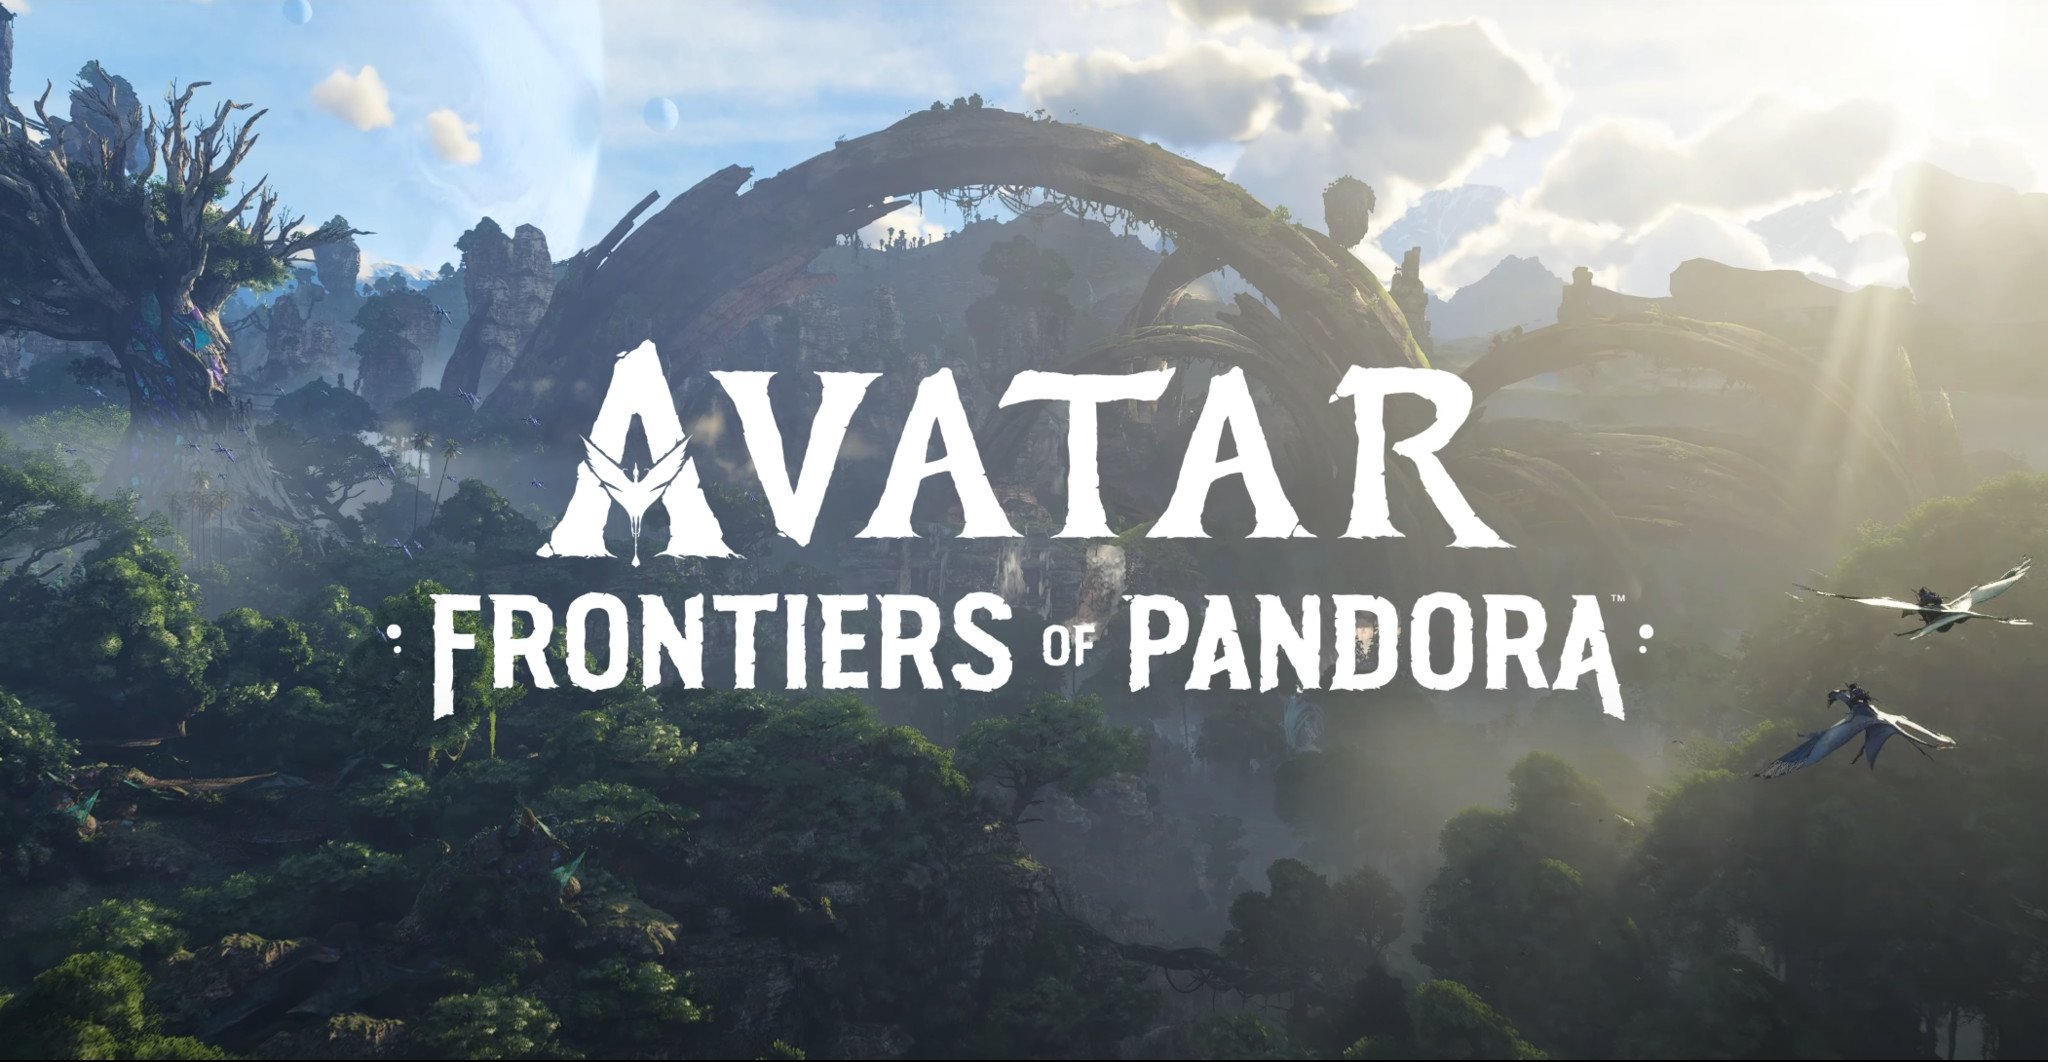 Avatar: Frontiers of Pandora is exclusive, Xbox One or PS4 version planned | Windows Central